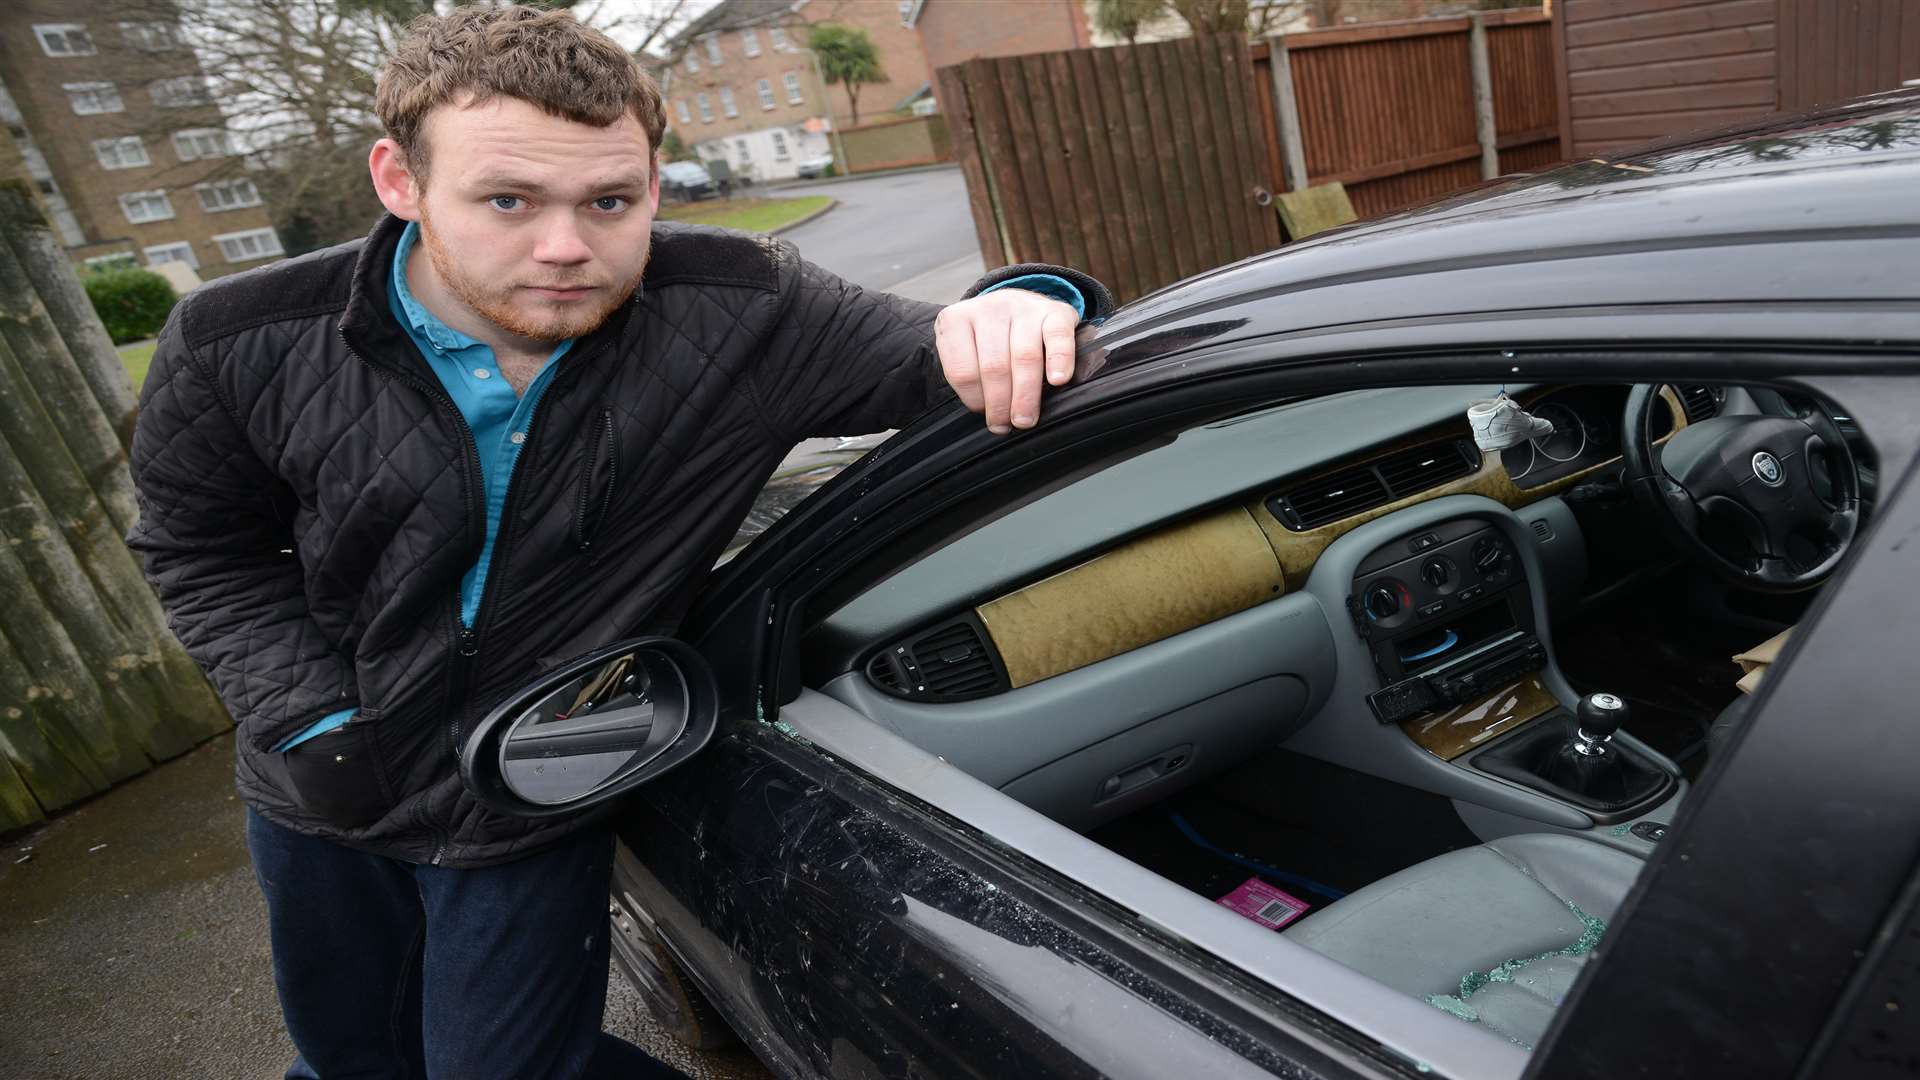 Troy Powell's car window was smashed by vandals